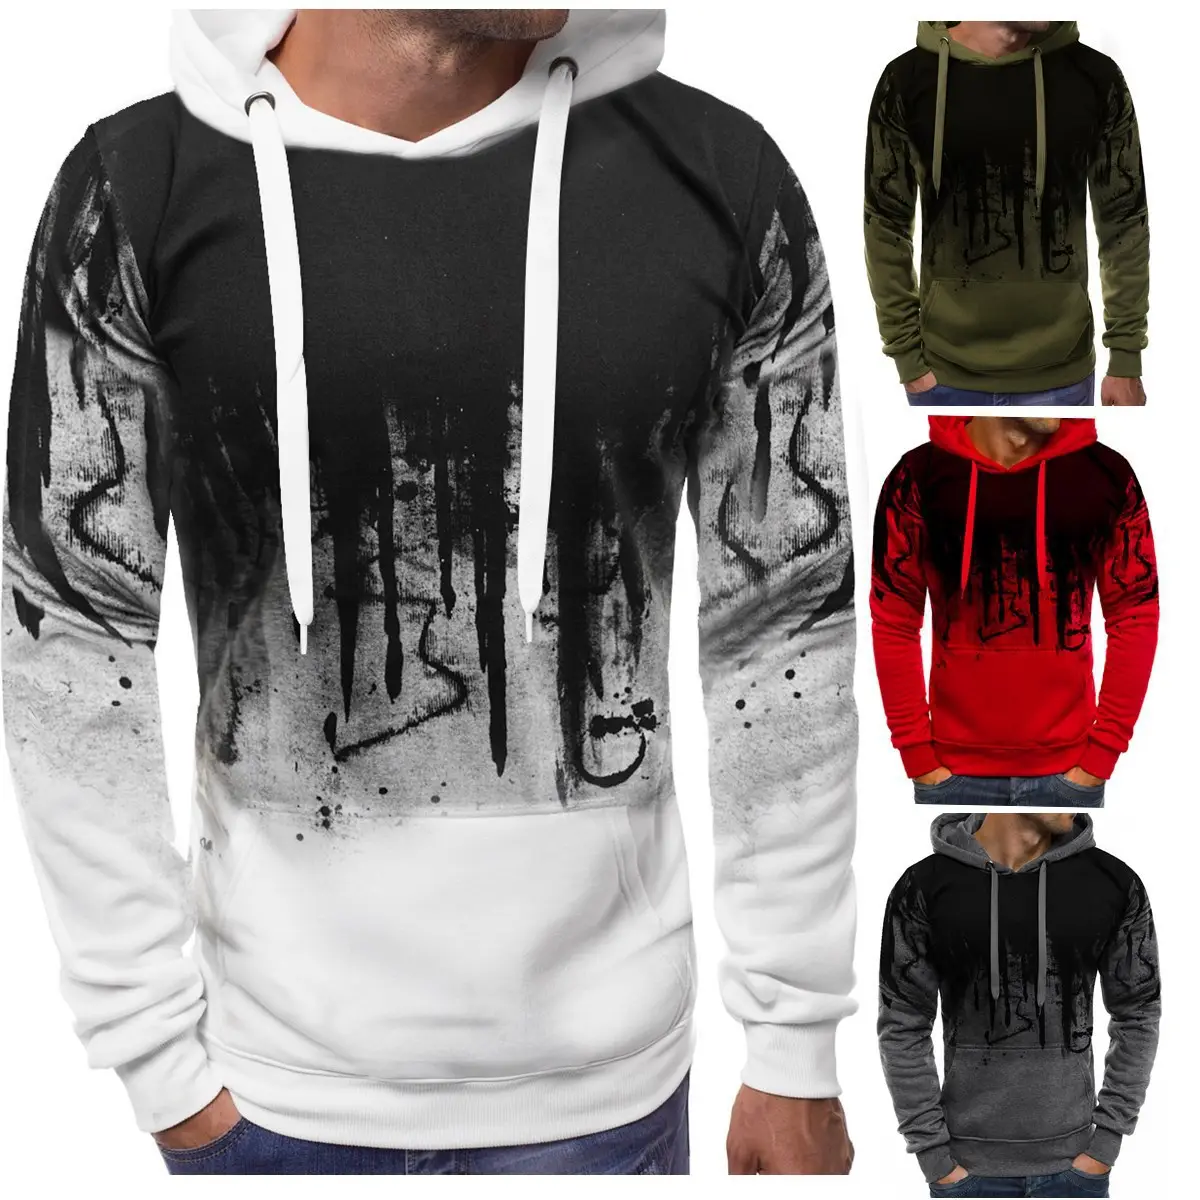 Mens Sports Hoodies Casual Slim Camouflage Sweatshirts Streetwear Male Fashion Sports Pullover Outwear Coat Clothing